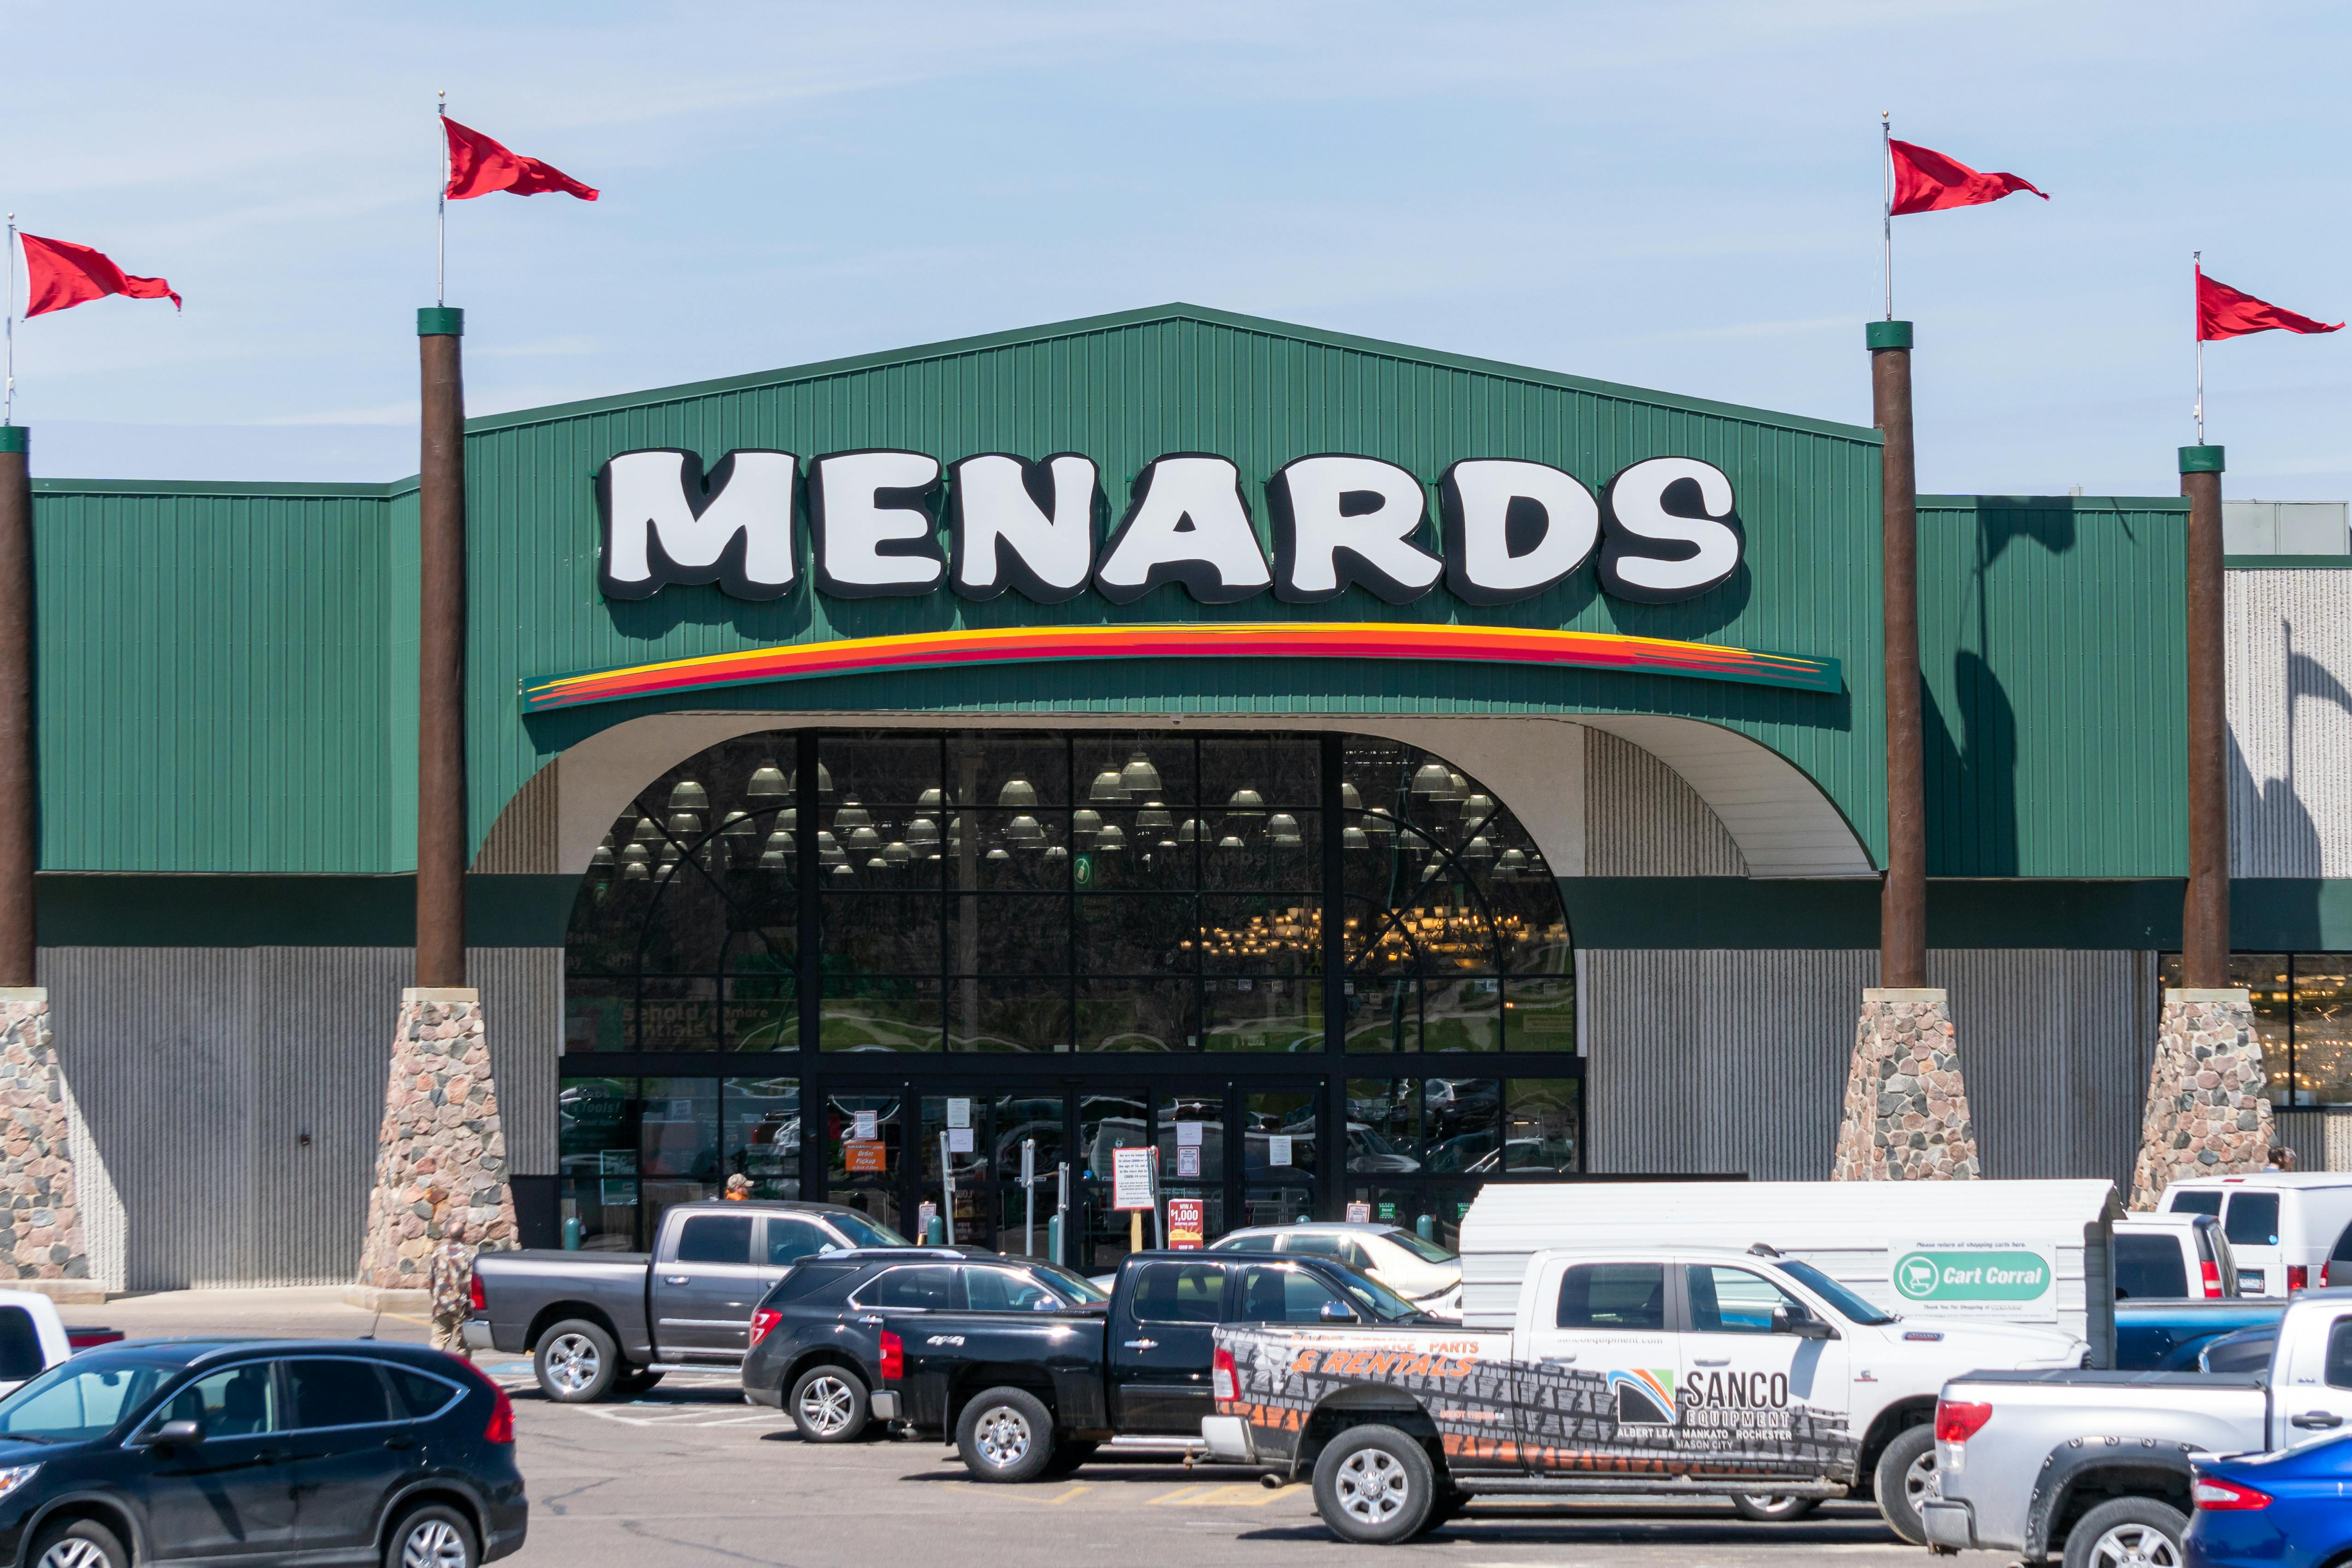 A Menards storefront with cars in the parking lot.